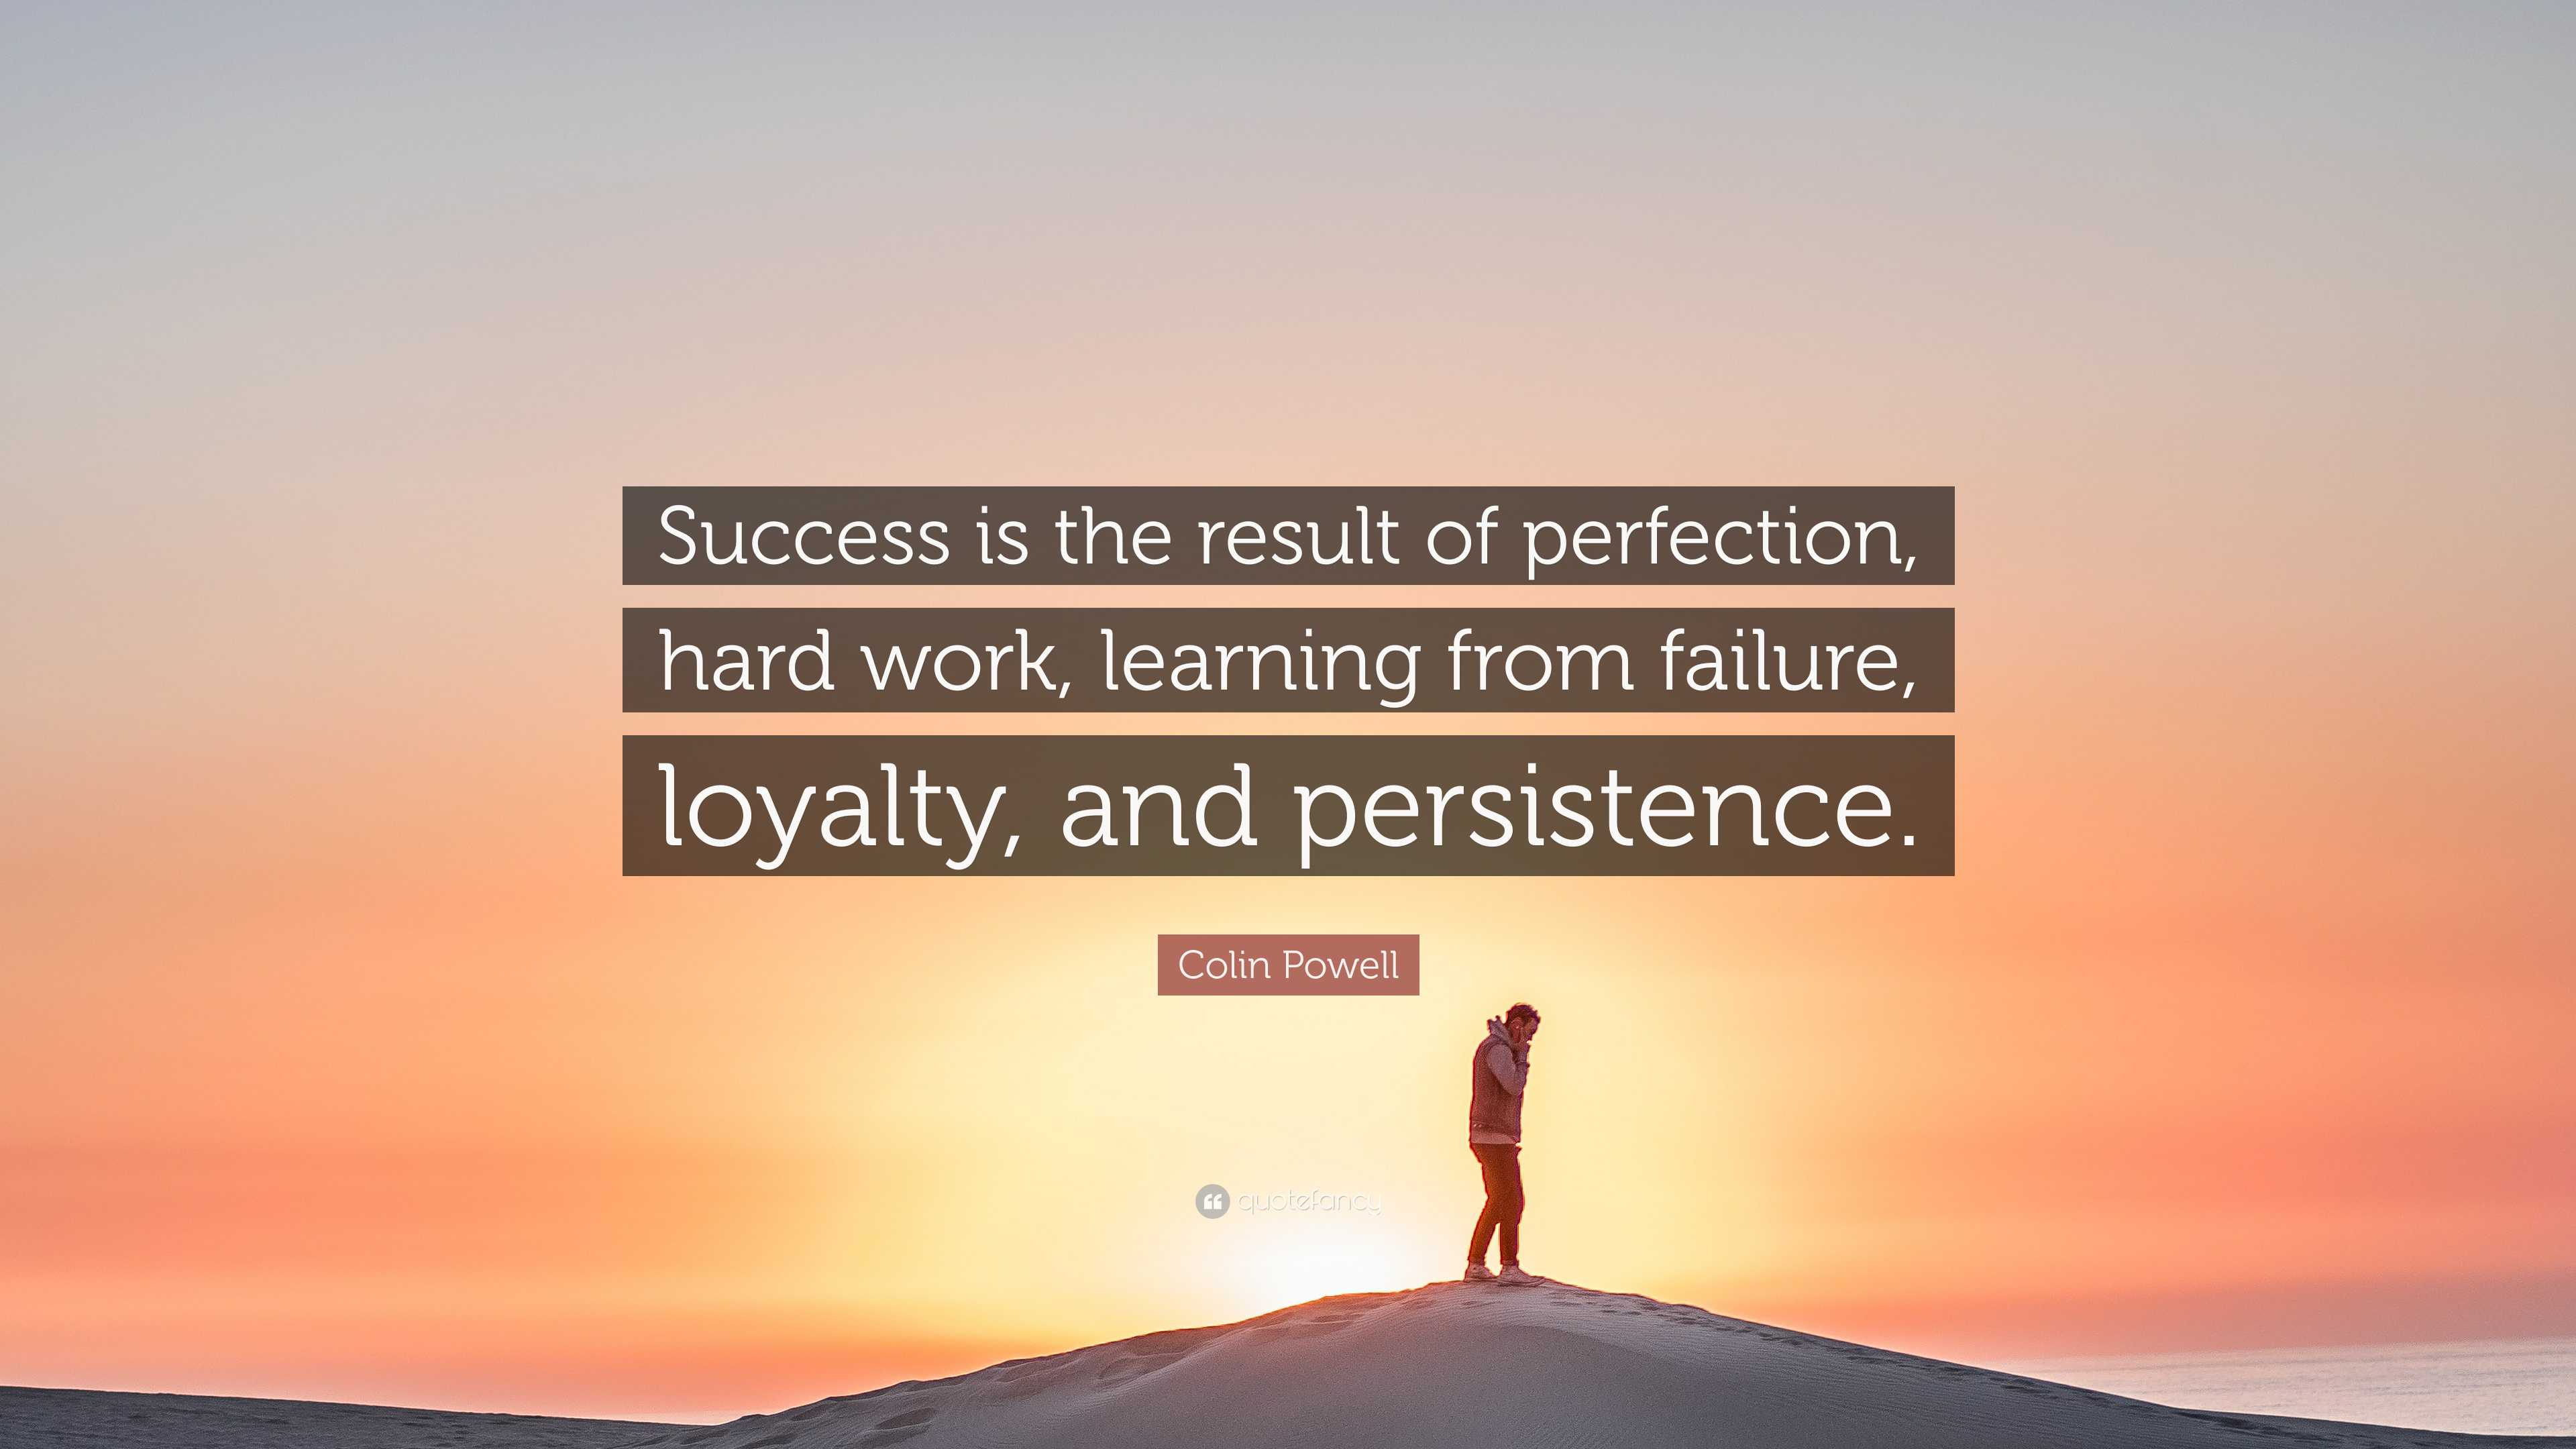 Colin Powell Quote: “Success is the result of perfection, hard work ...